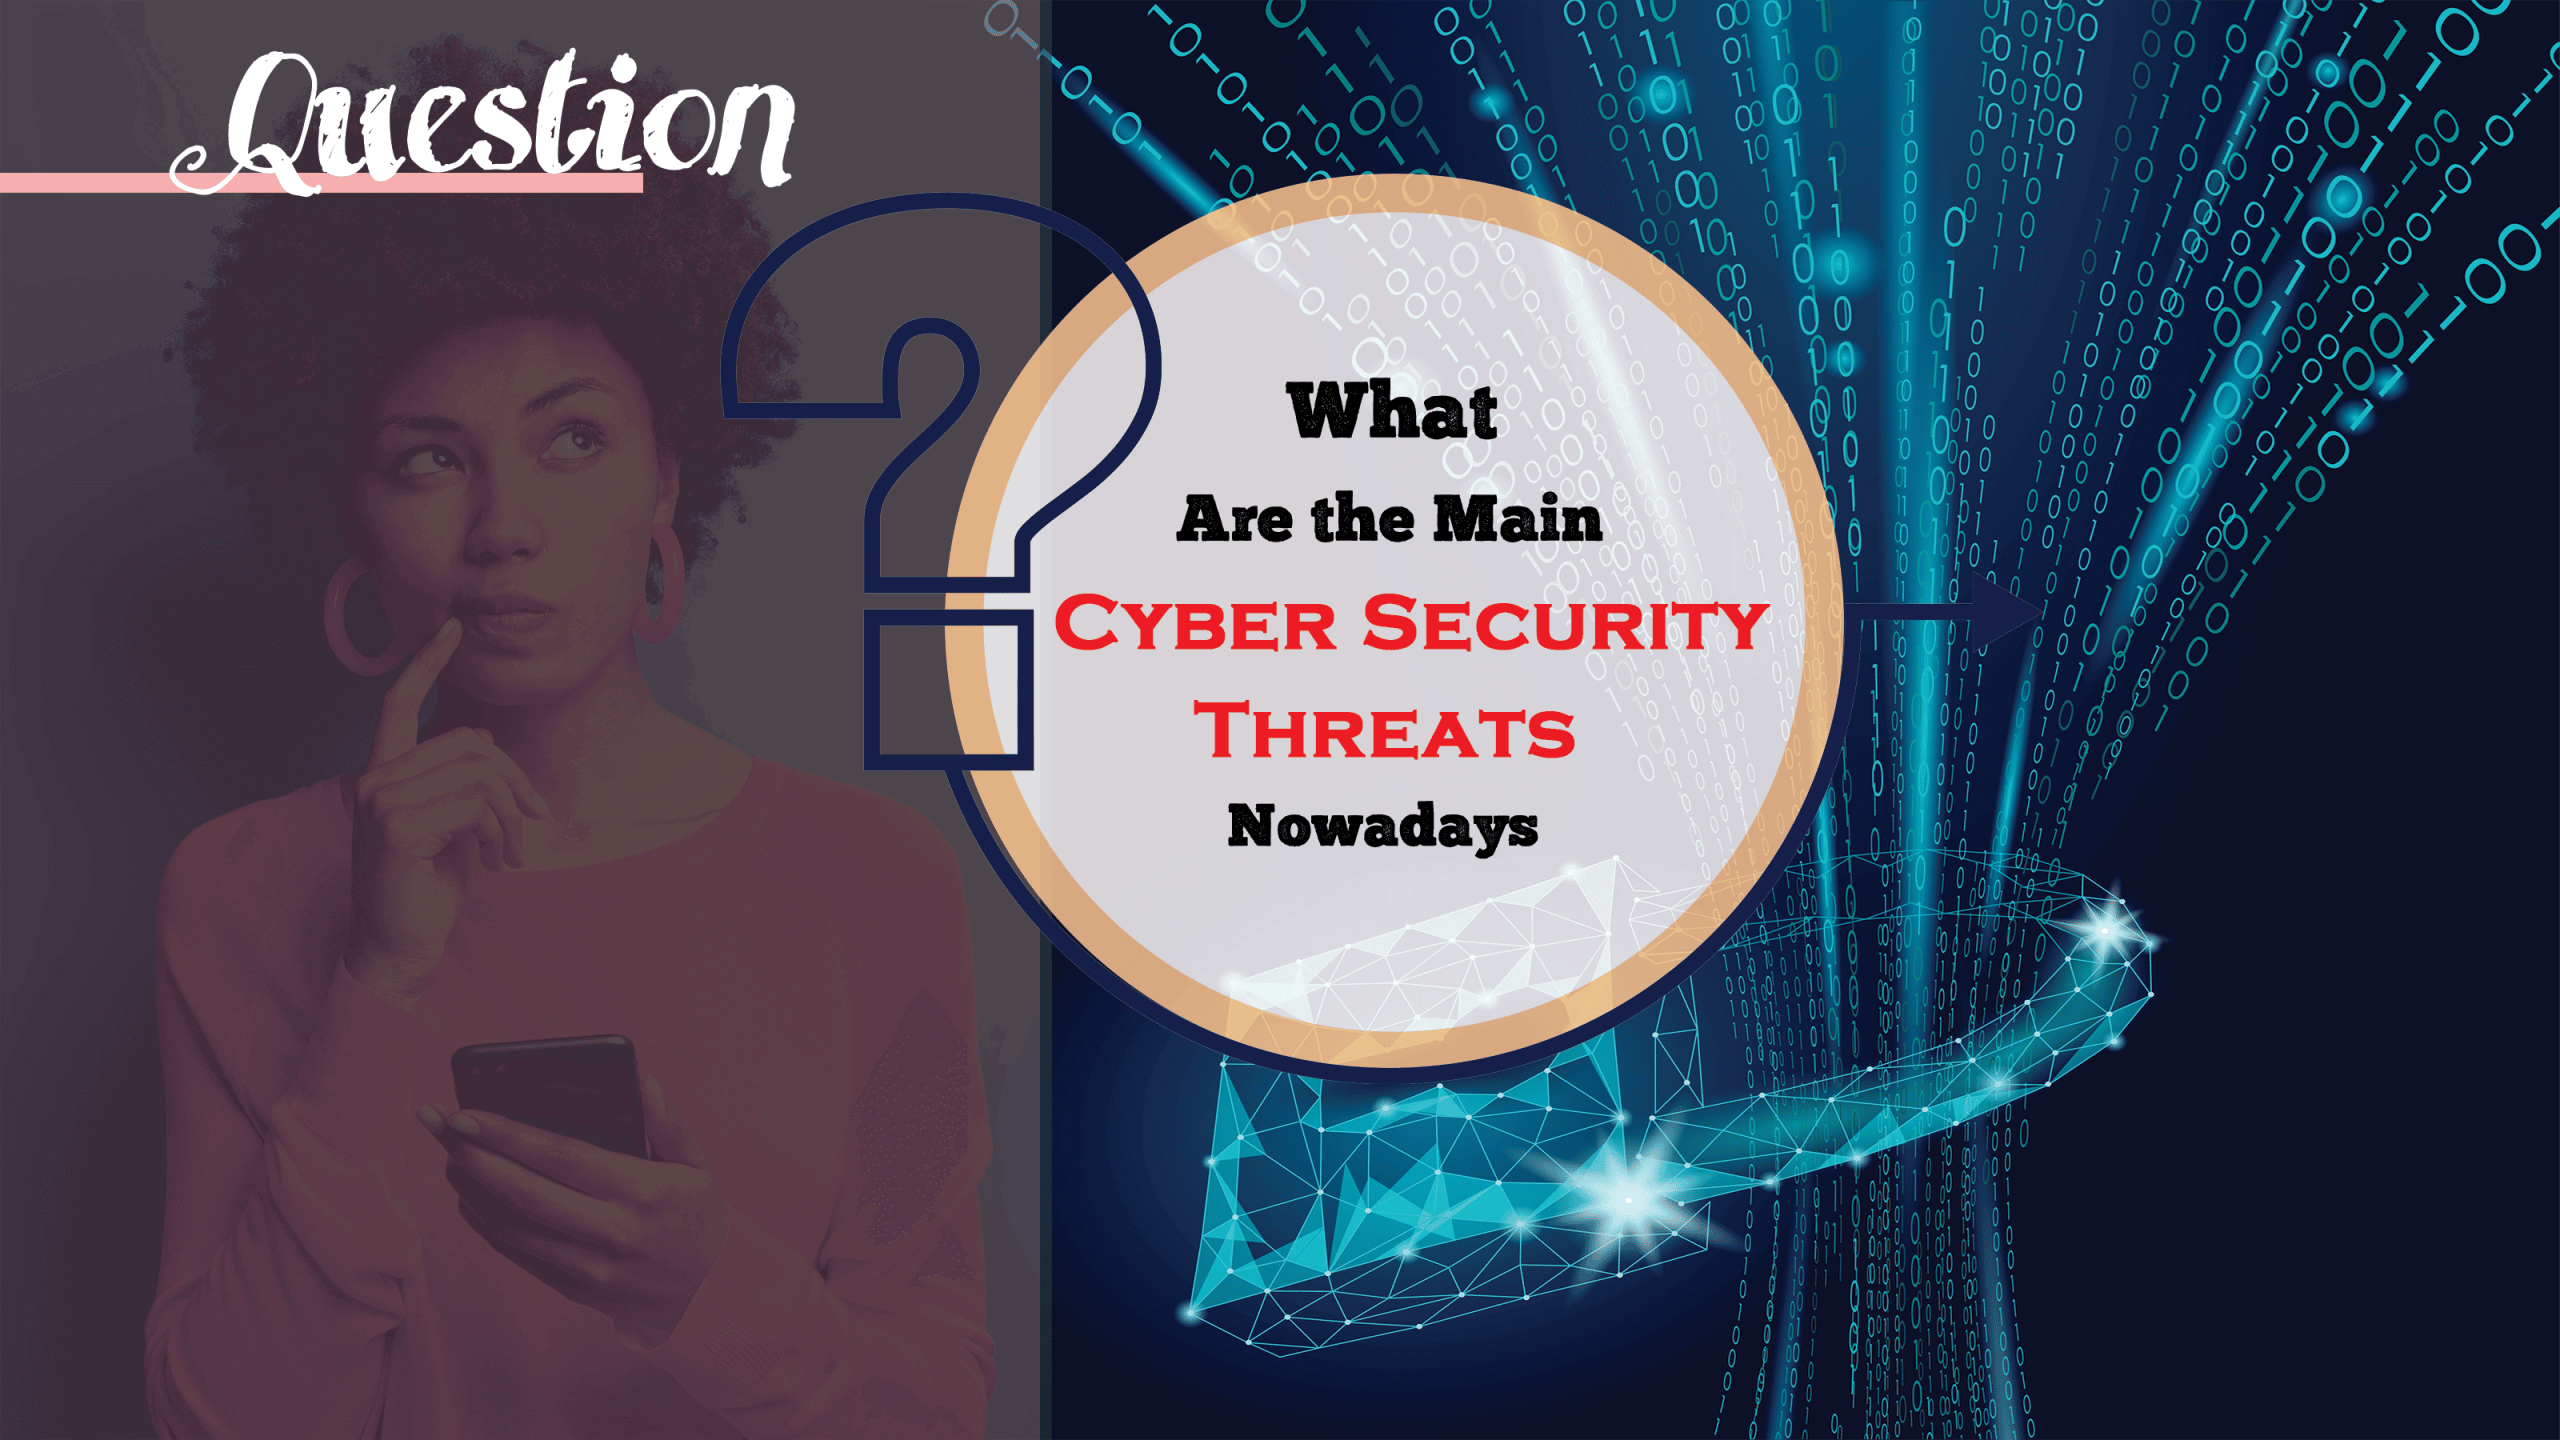 What Are the Main Cyber Security Threats Nowadays?